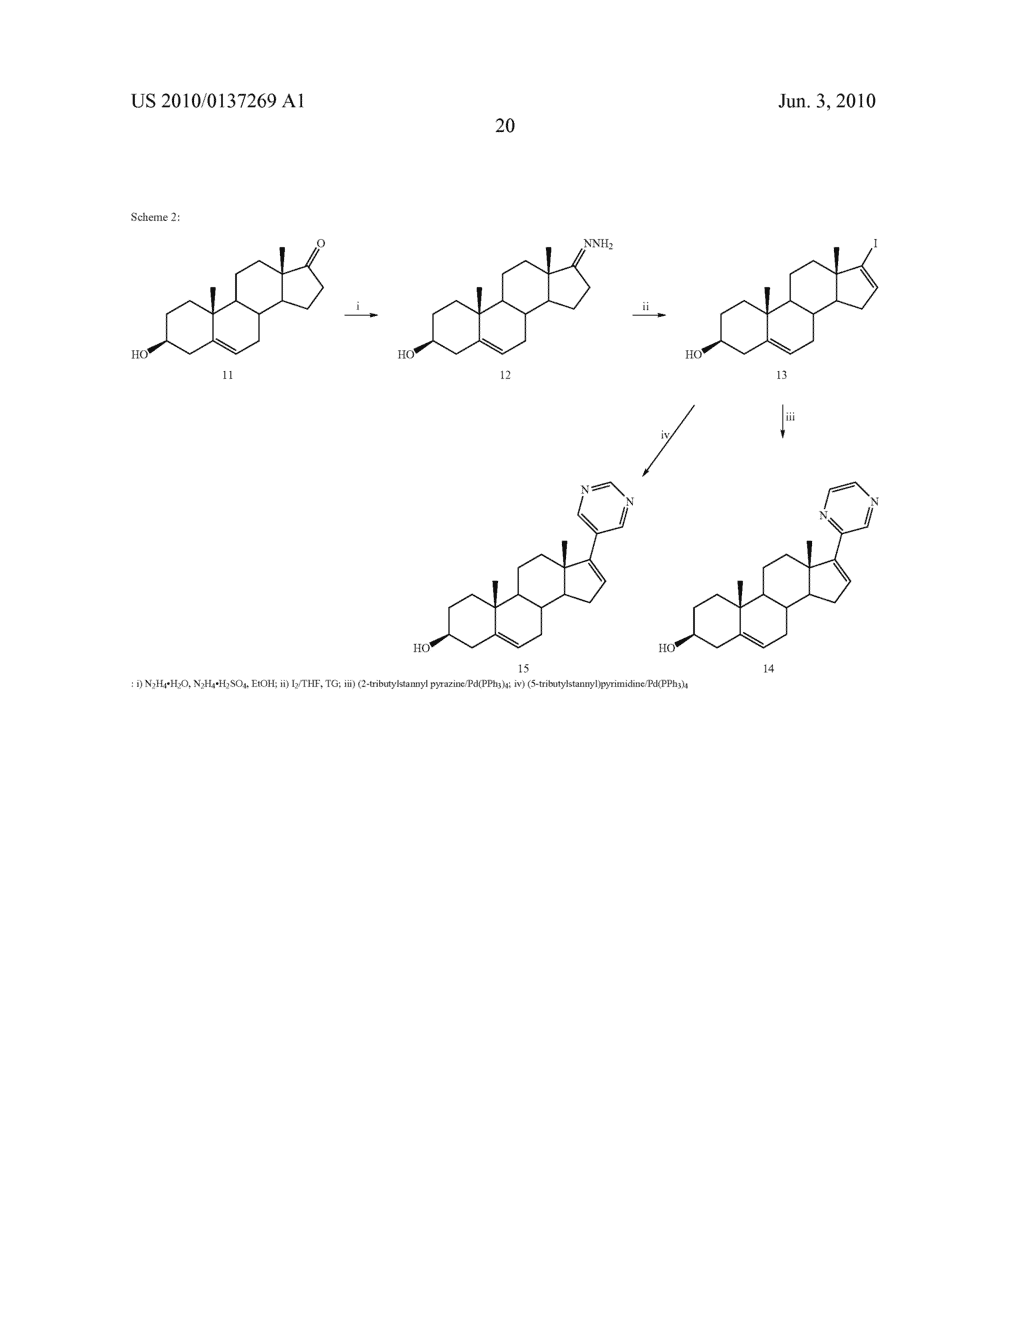 Novel C-17-Heteroaryl Steroidal Cyp17 Inhibitors/Antiandrogens: Synehesis, In Vitro Biological Activities, Pharmacokinetics and Antitumor Activity - diagram, schematic, and image 29